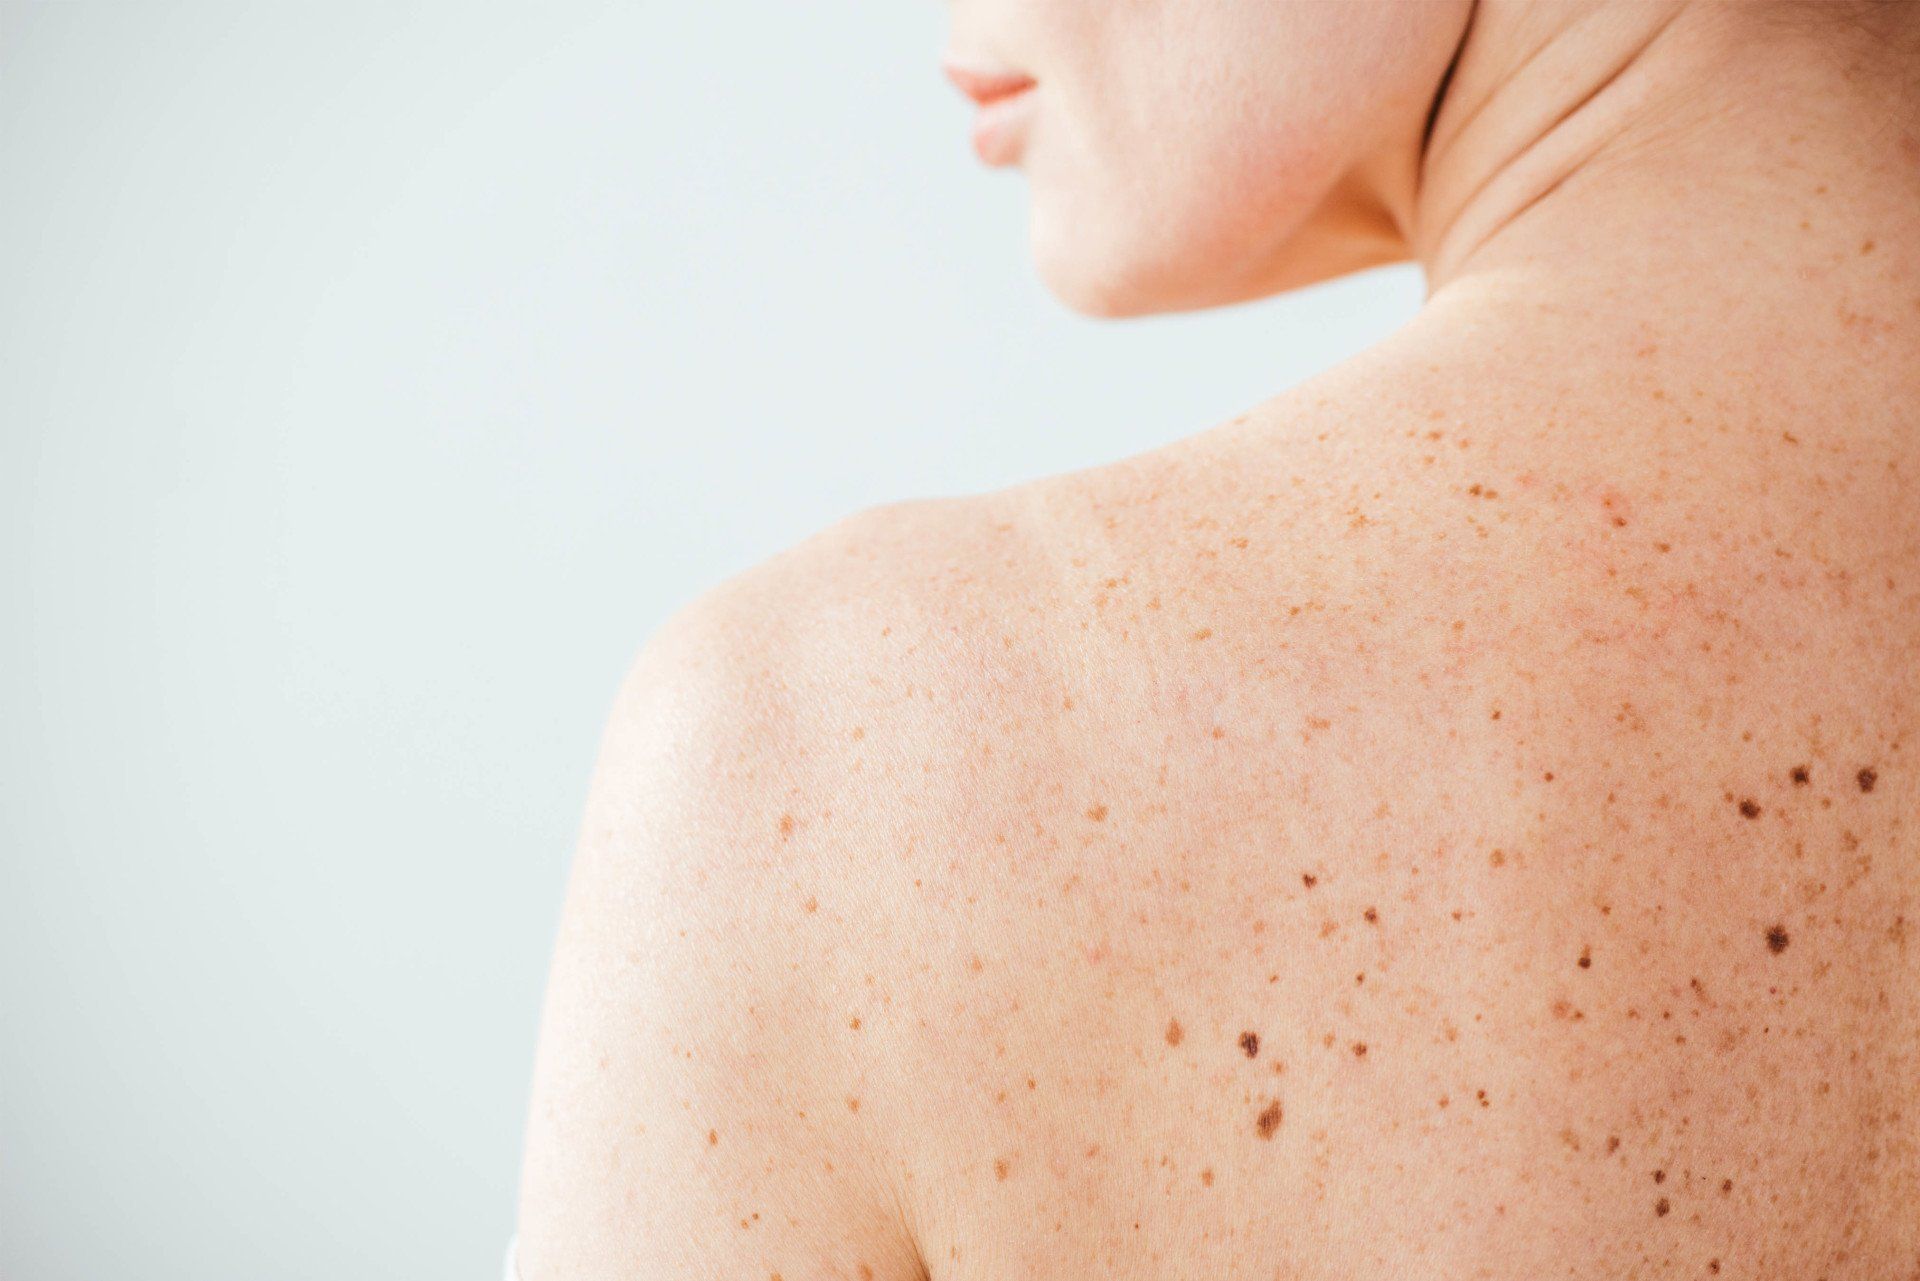 moles and skin tags need surgical treatment at Pure Dermatology